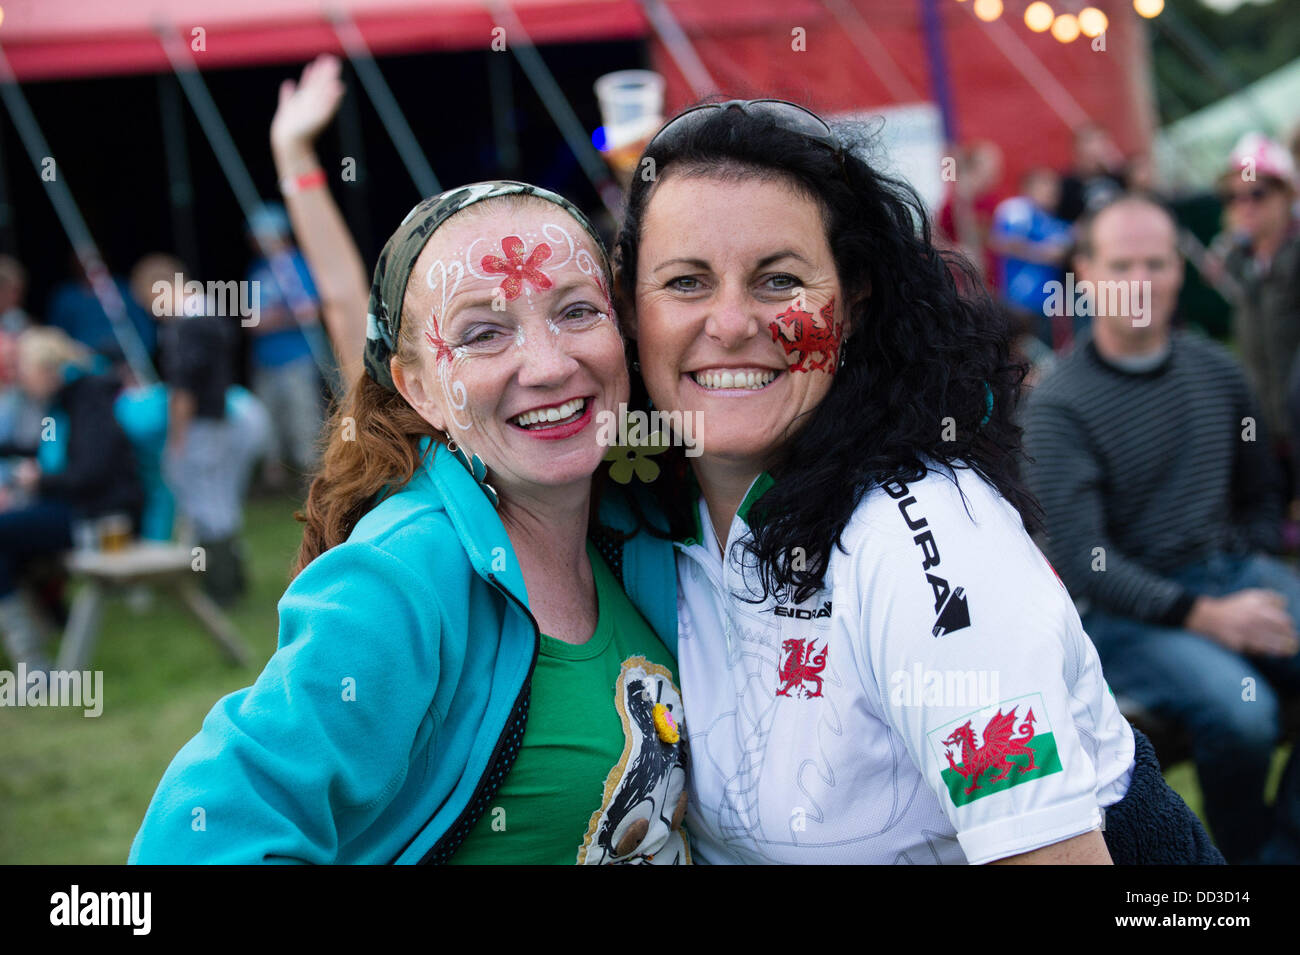 Aberystwyth Wales UK, Saturday 24 August 2013 Two adult women enjoying themselves at a music festival  The second day of the  2013 Big Tribute Festival, Wales's only music festival devoted to covers bands. August Bank Holiday weekend 2013  photo Credit:  keith  morris/Alamy Live News Stock Photo